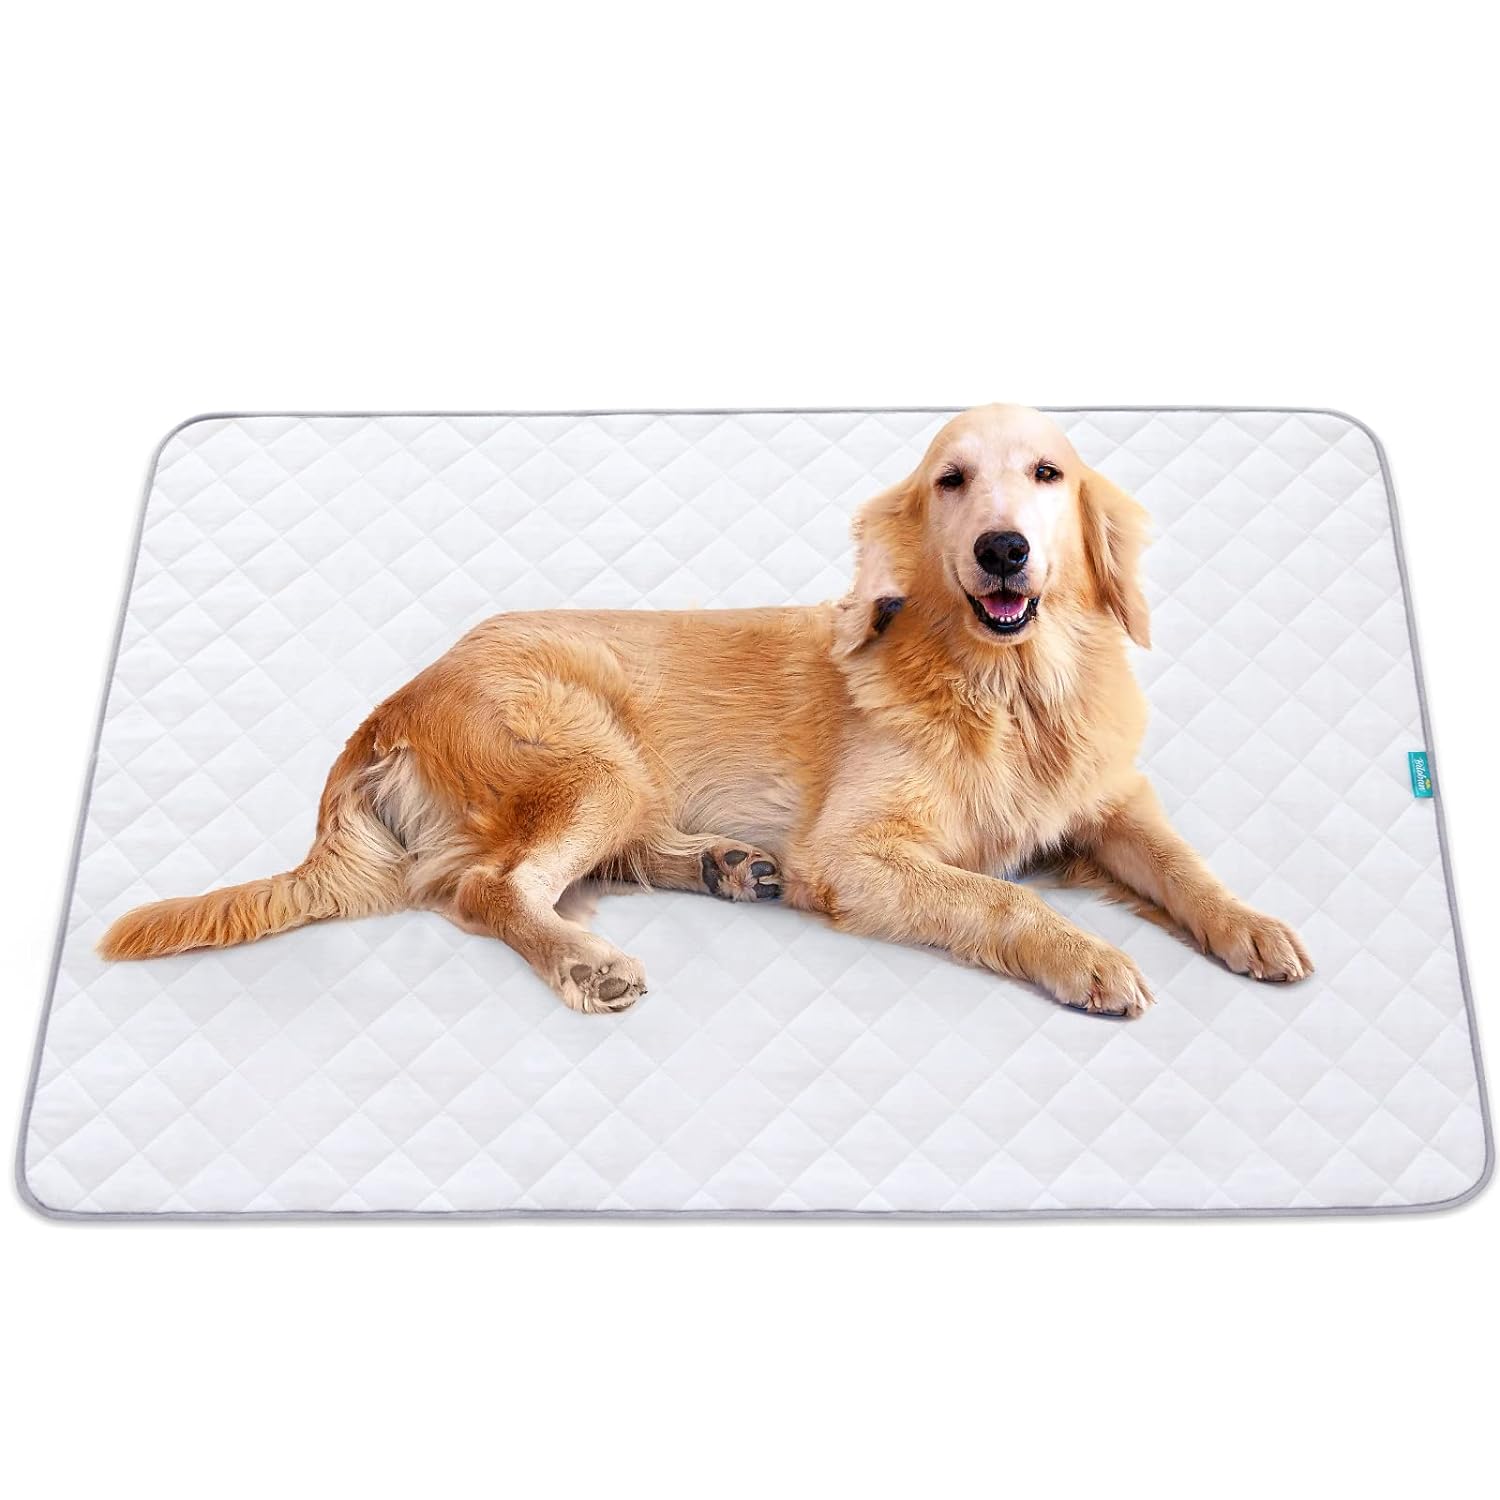 Waterproof Bed Pad/ Mat - Quilted Protector with Cotton Surface and Non-slip Back for Adults, Kids and Pets, Machine Washable - Biloban Online Store